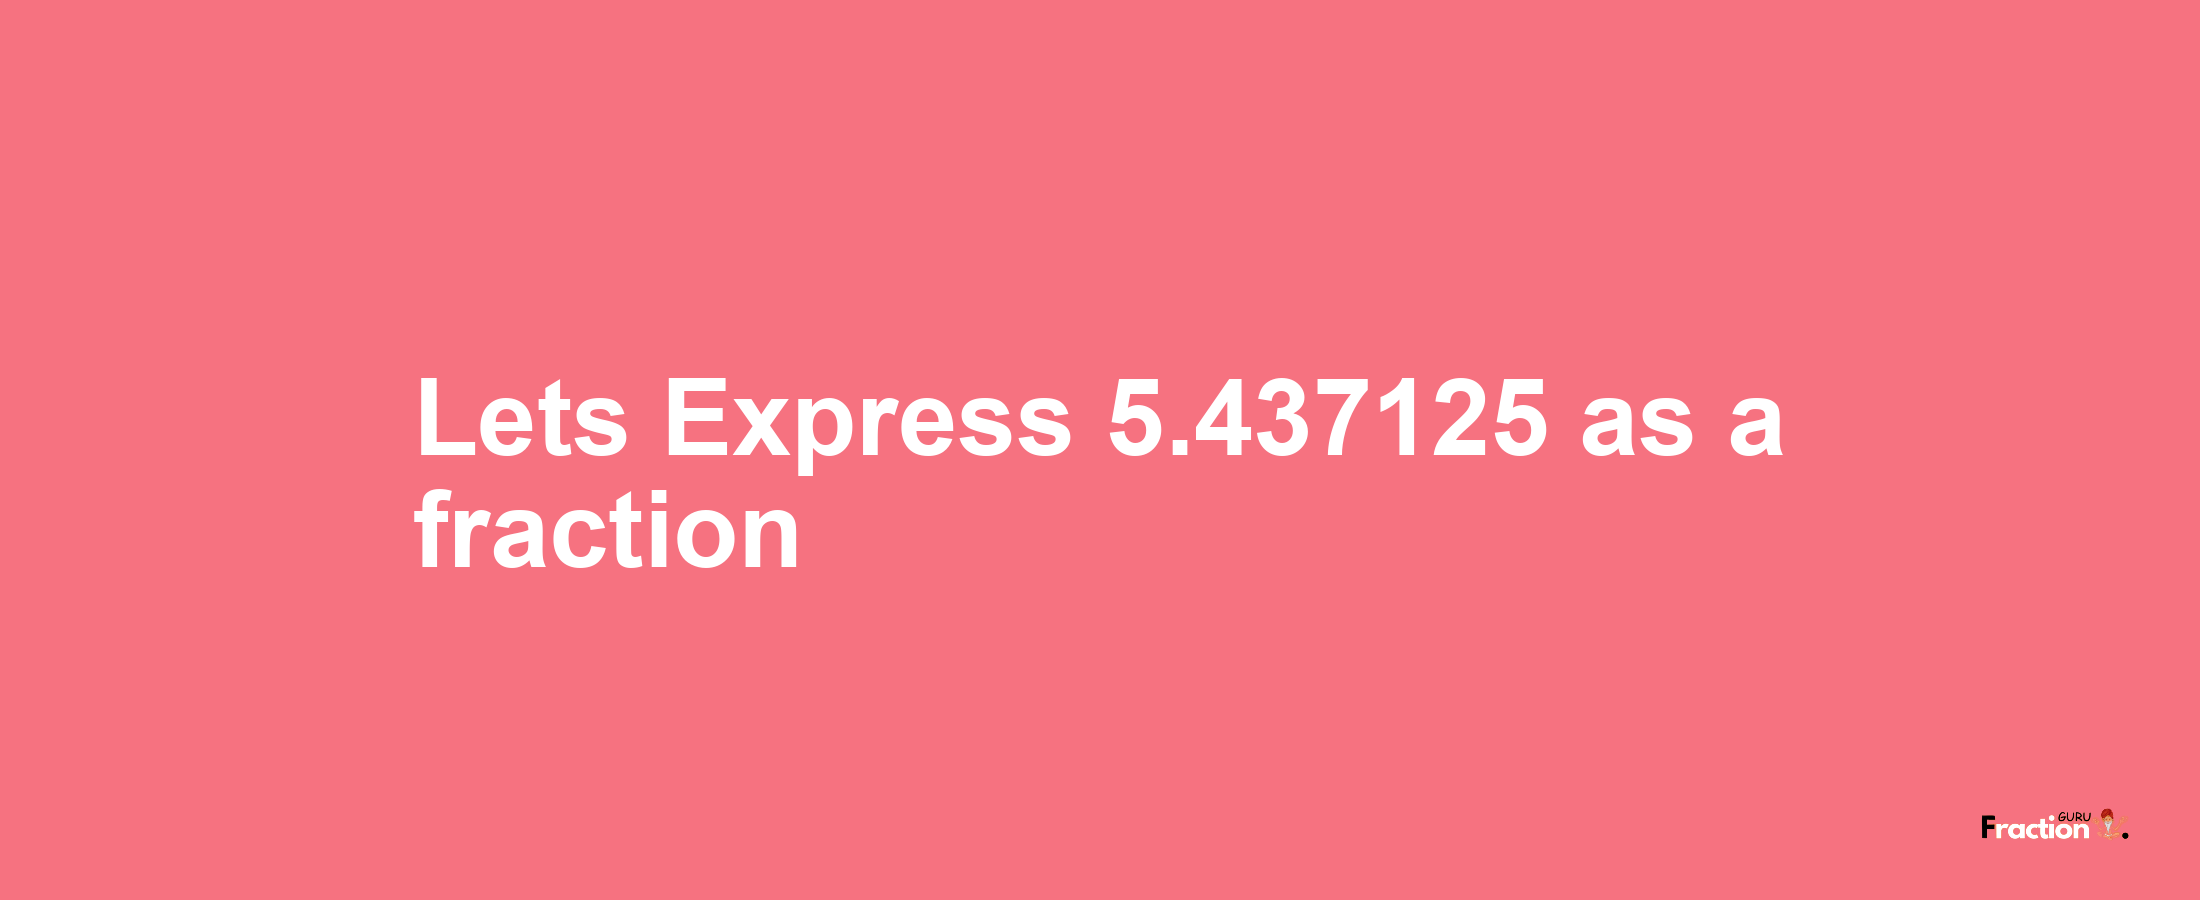 Lets Express 5.437125 as afraction